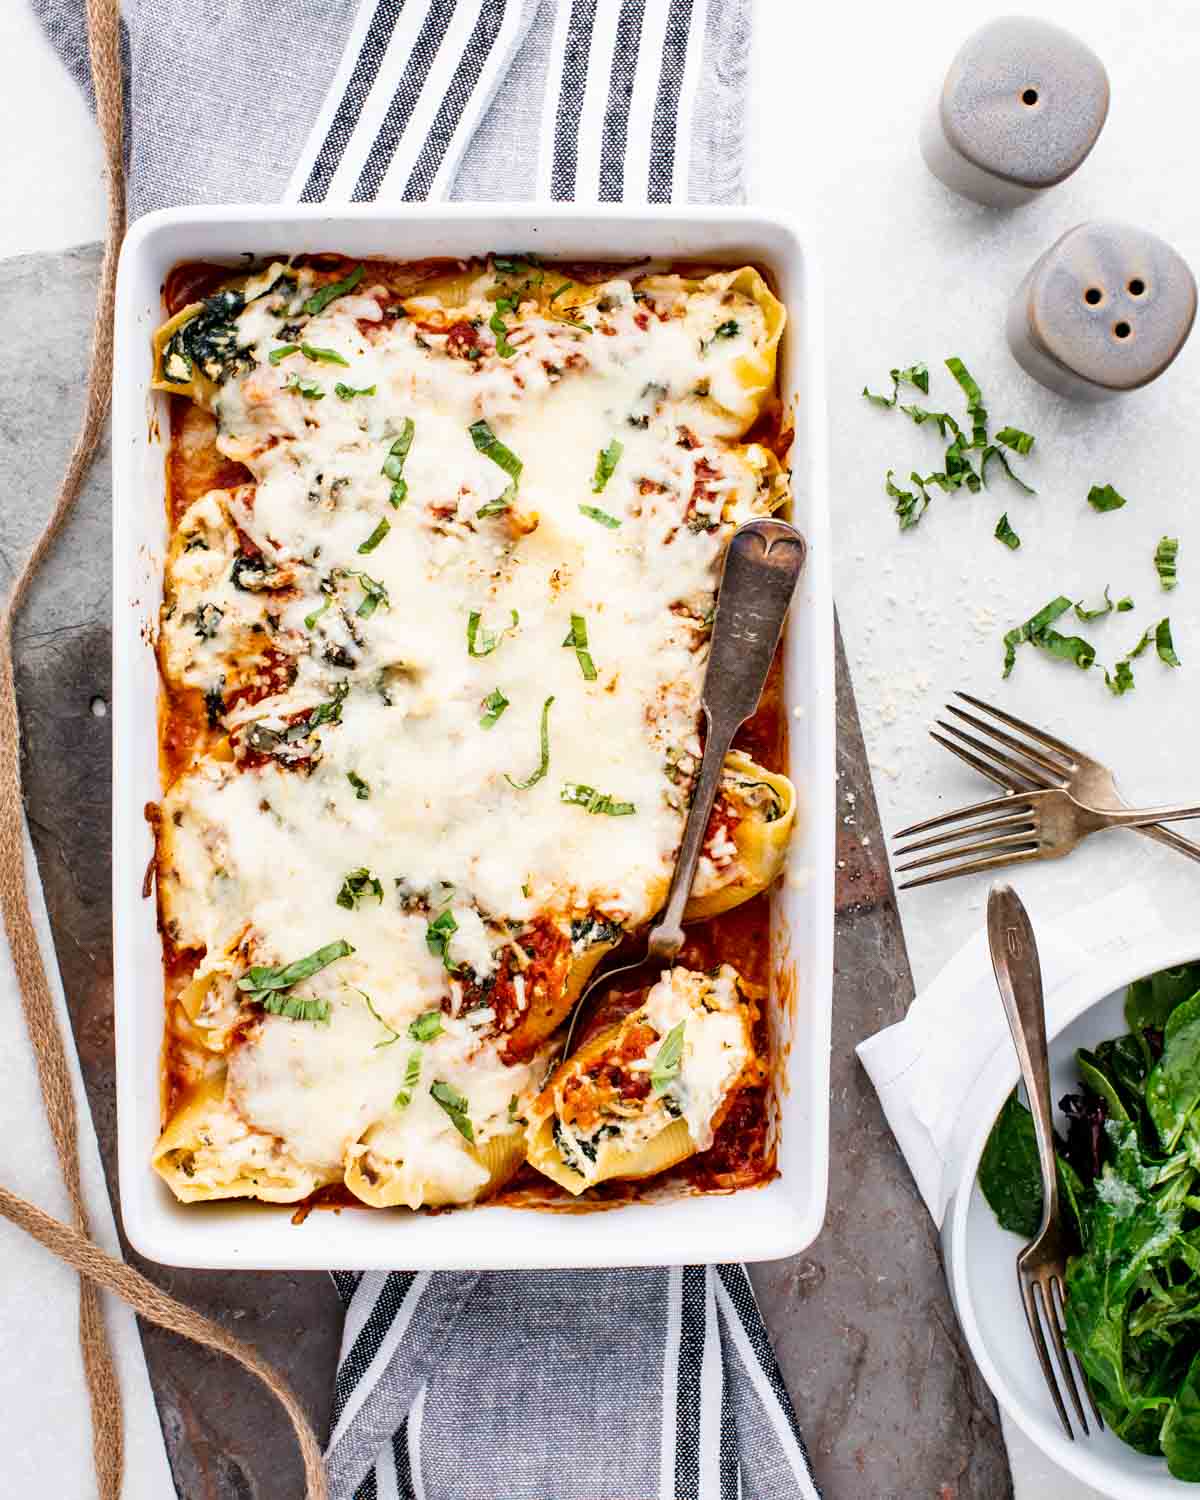 Vegetarian Stuffed Shells with Tofu and Spinach in a casserole dish